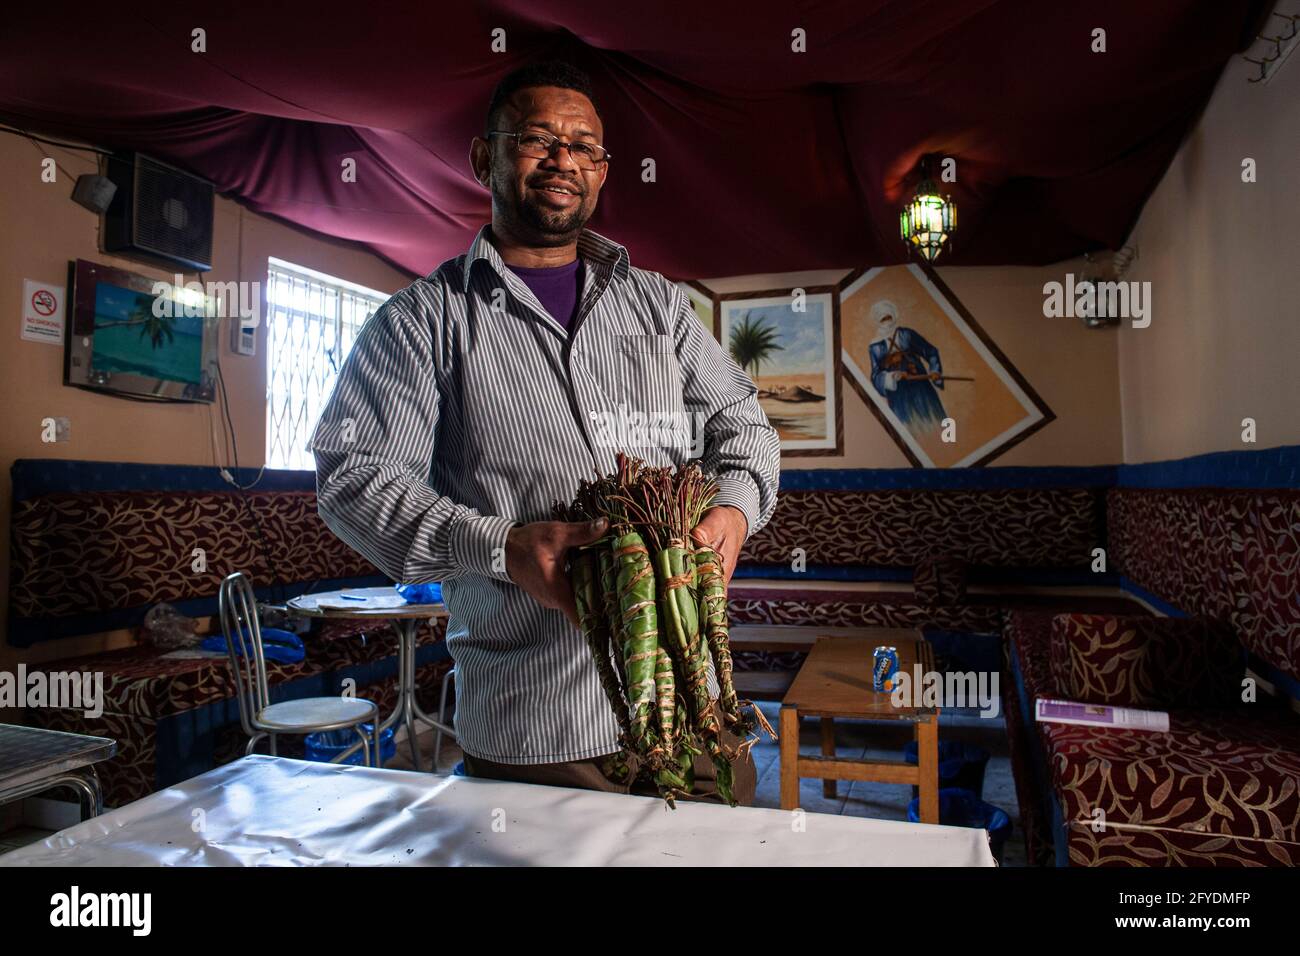 Camden ,London, UK. The drug Khat on the table in local Somali cafe. The drug mainly used by Somalians becomes illegal in the UK. Stock Photo